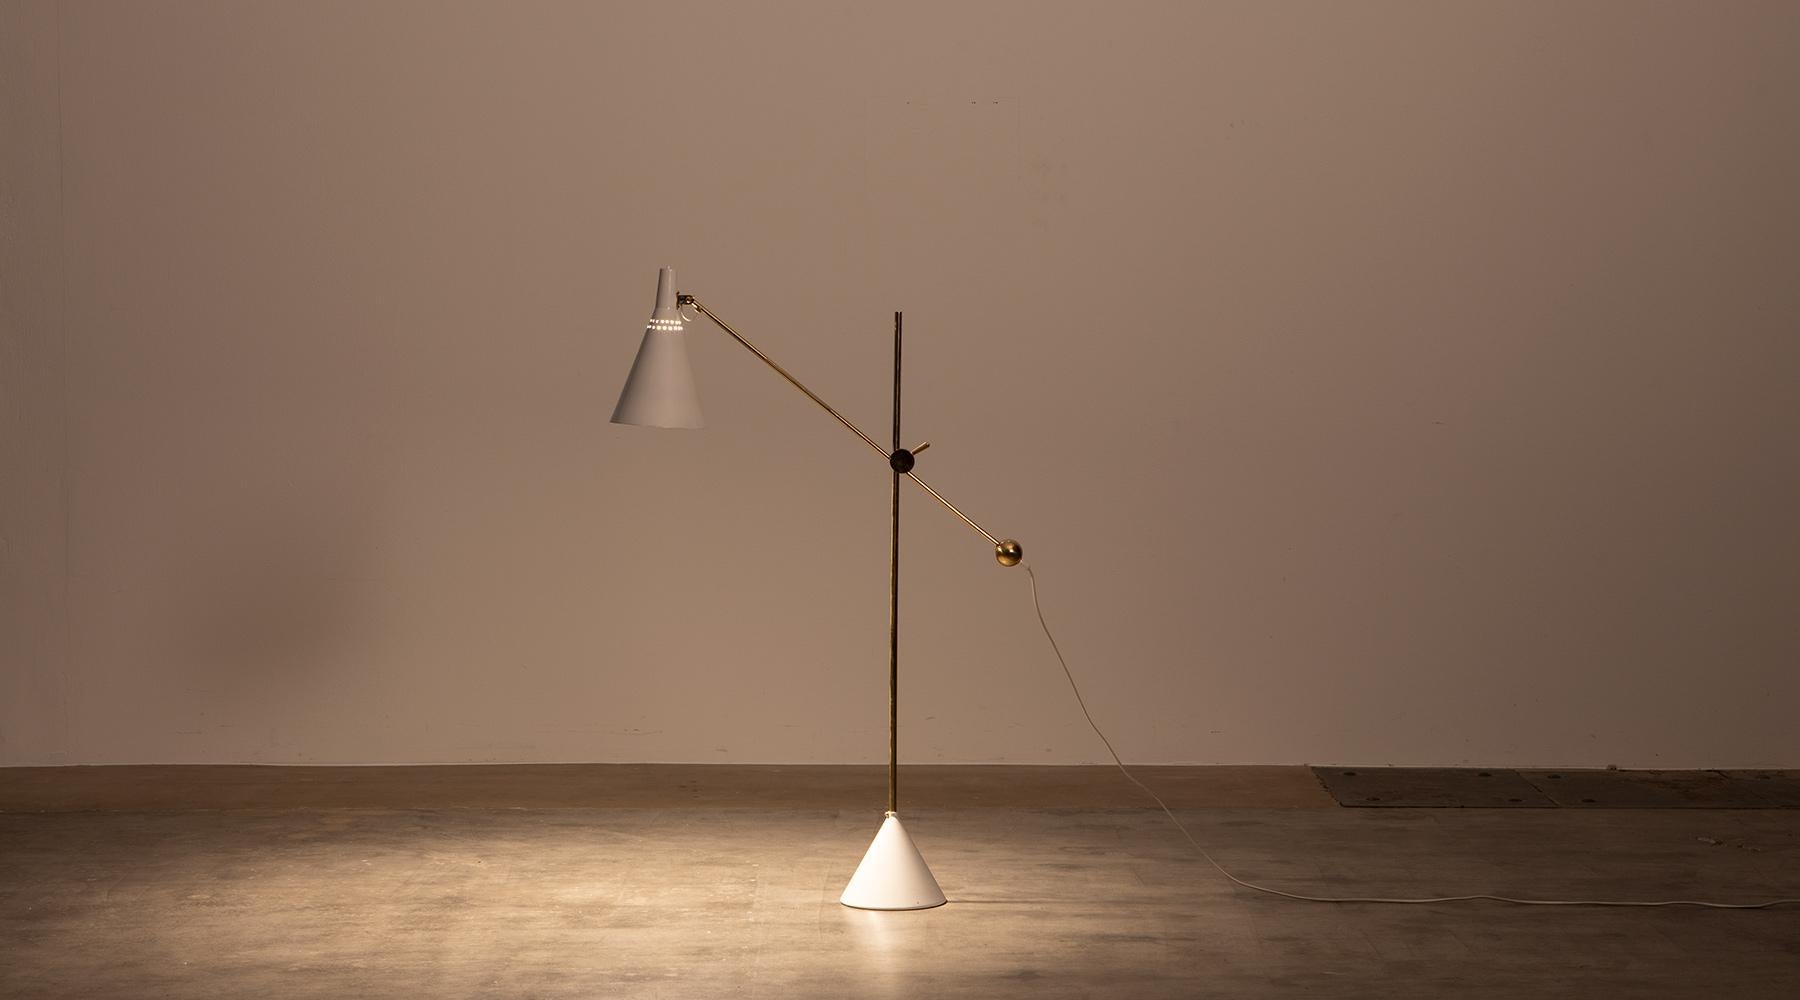 Floor Lamp, white metal and brass, Tapio Wirkkala, Finland, 1958.

Subtle floor lamp in white lacquered metal and brass by Tapio Wirkkala. The brass provides a brilliant reflection. The harmonious shape is destabilized through unusual details at